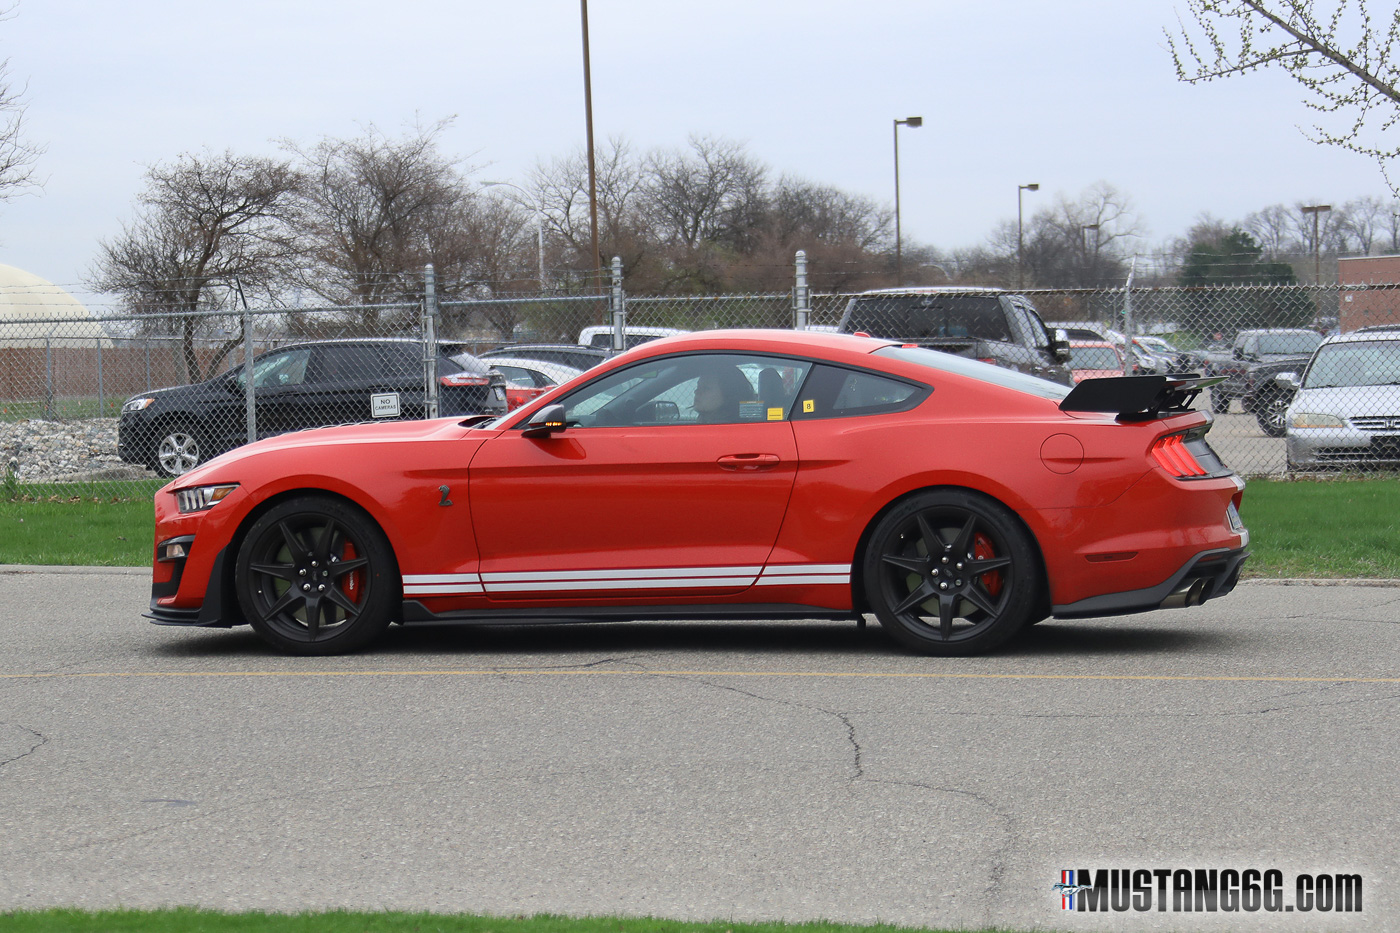 2020-Shelby-GT500-Mustang-Race-Red-8.jpg